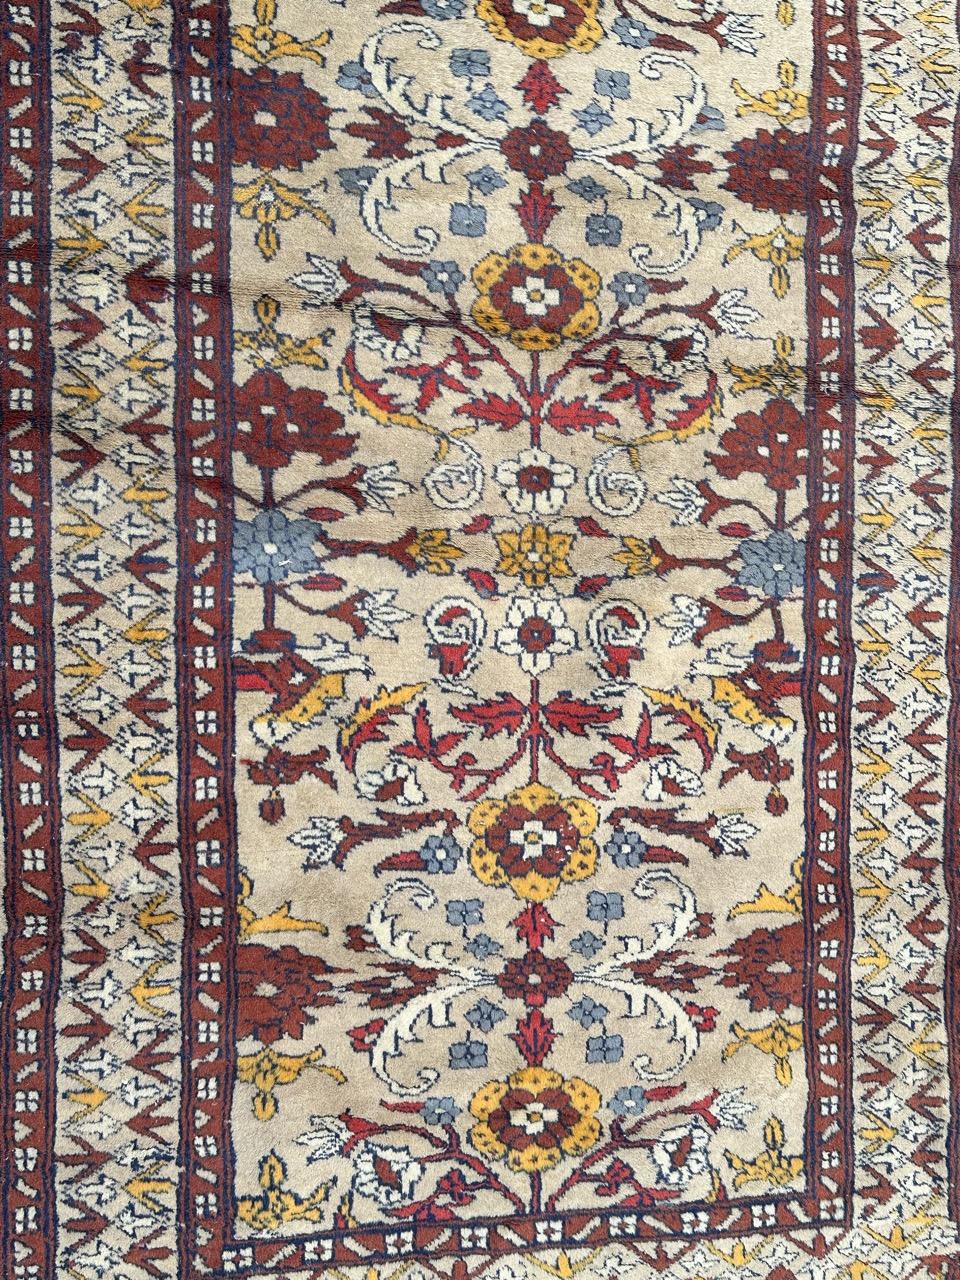 Pretty mid century Pakistani rug with a floral Persian rug and nice colours with a beige field, yellow, red, blue with and black, entirely and finely hand knotted with wool on cotton foundation.
✨✨✨
